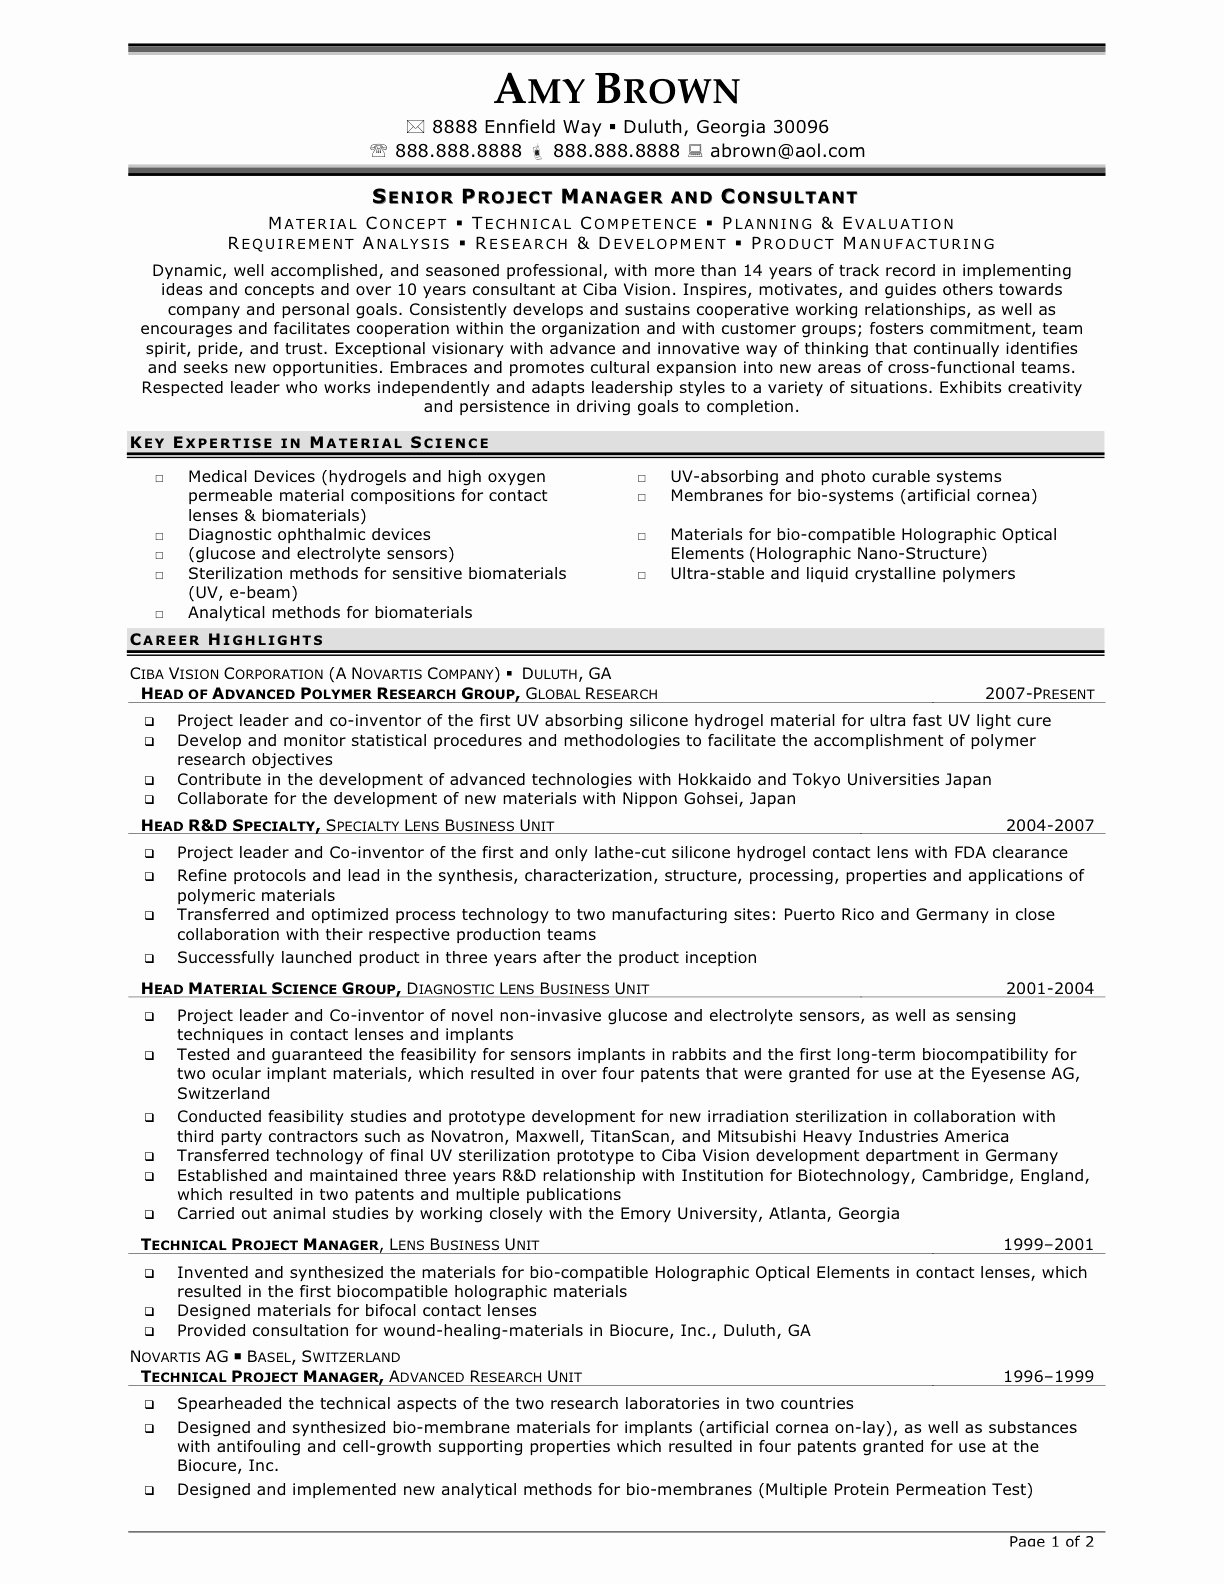 Senior Project Manager Resume